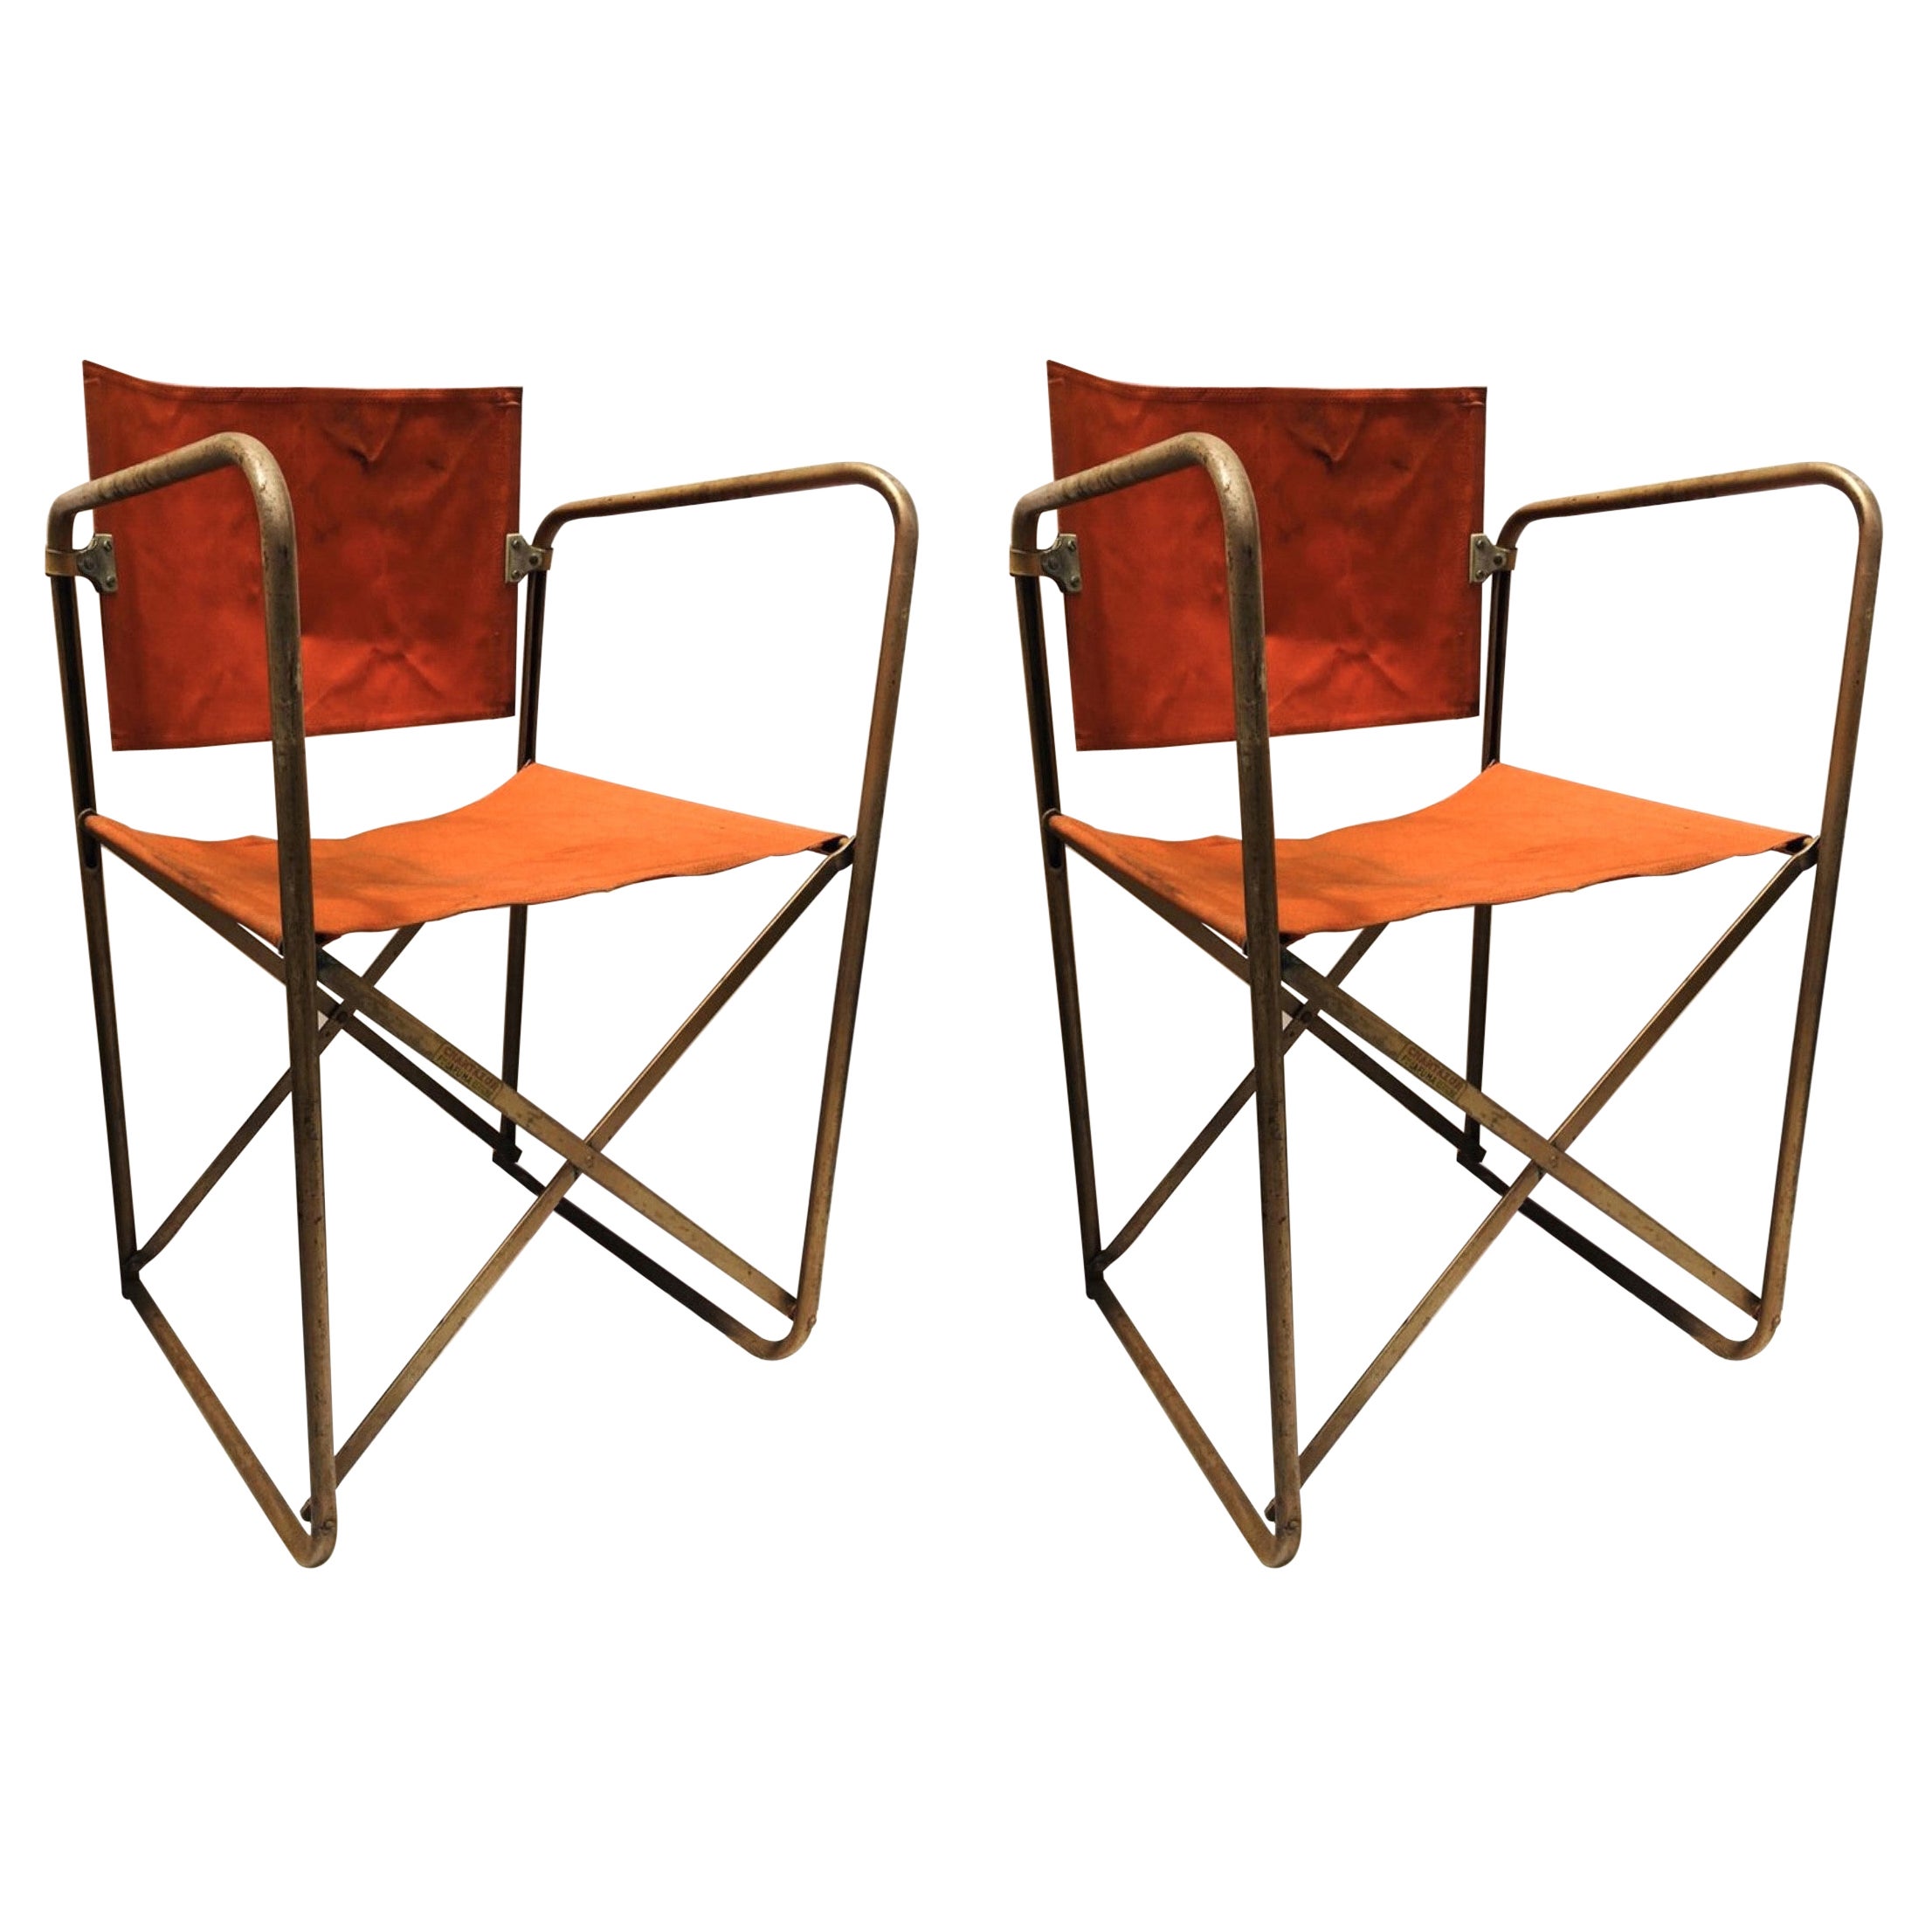 Chantazur pair of folding canvas chairs with armrest by Lafuma Chantazur For Sale